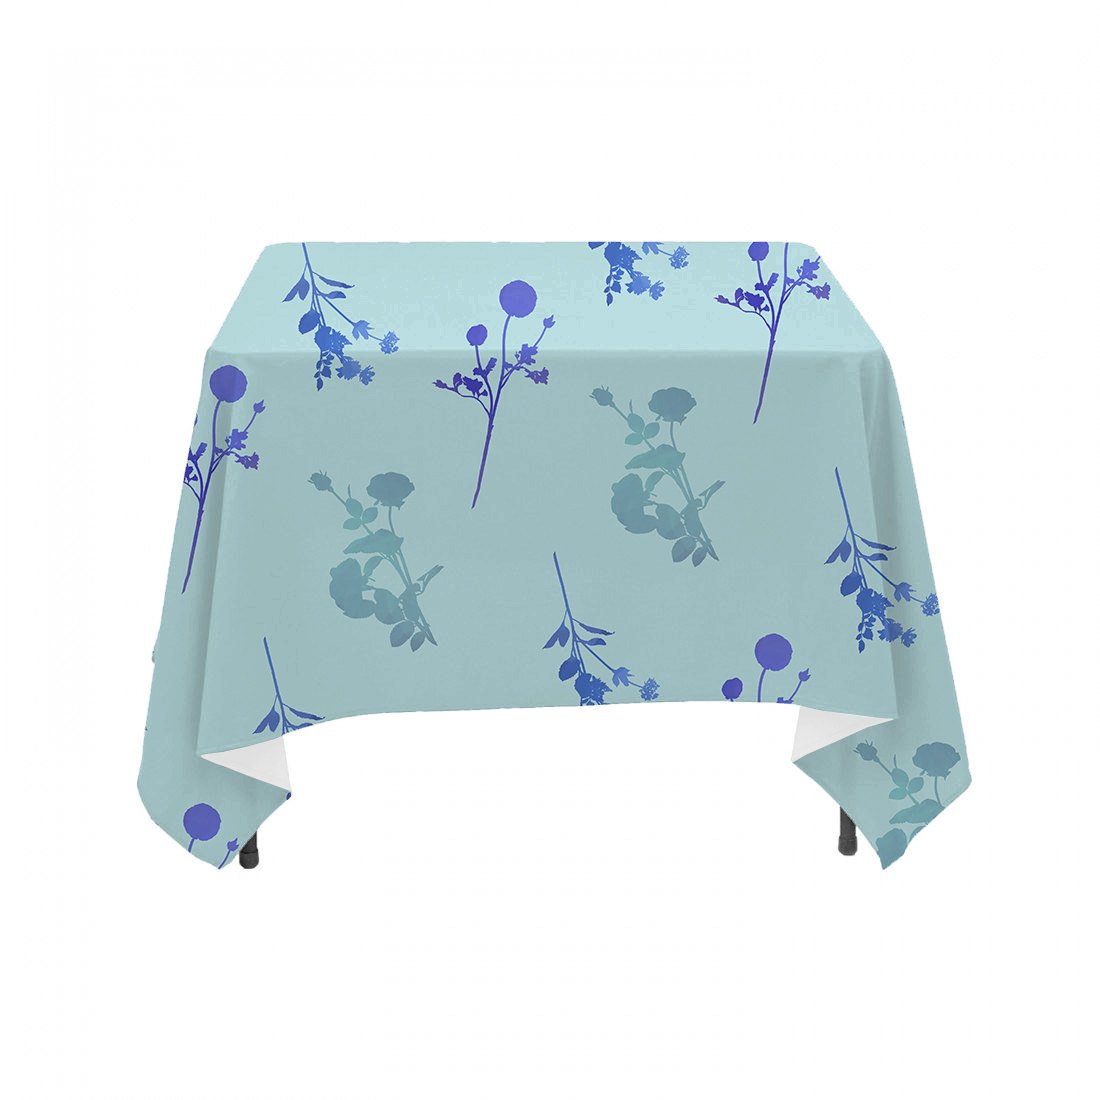 Blue Wildflower Watercolor Floral Stems- Linen Table Cloth